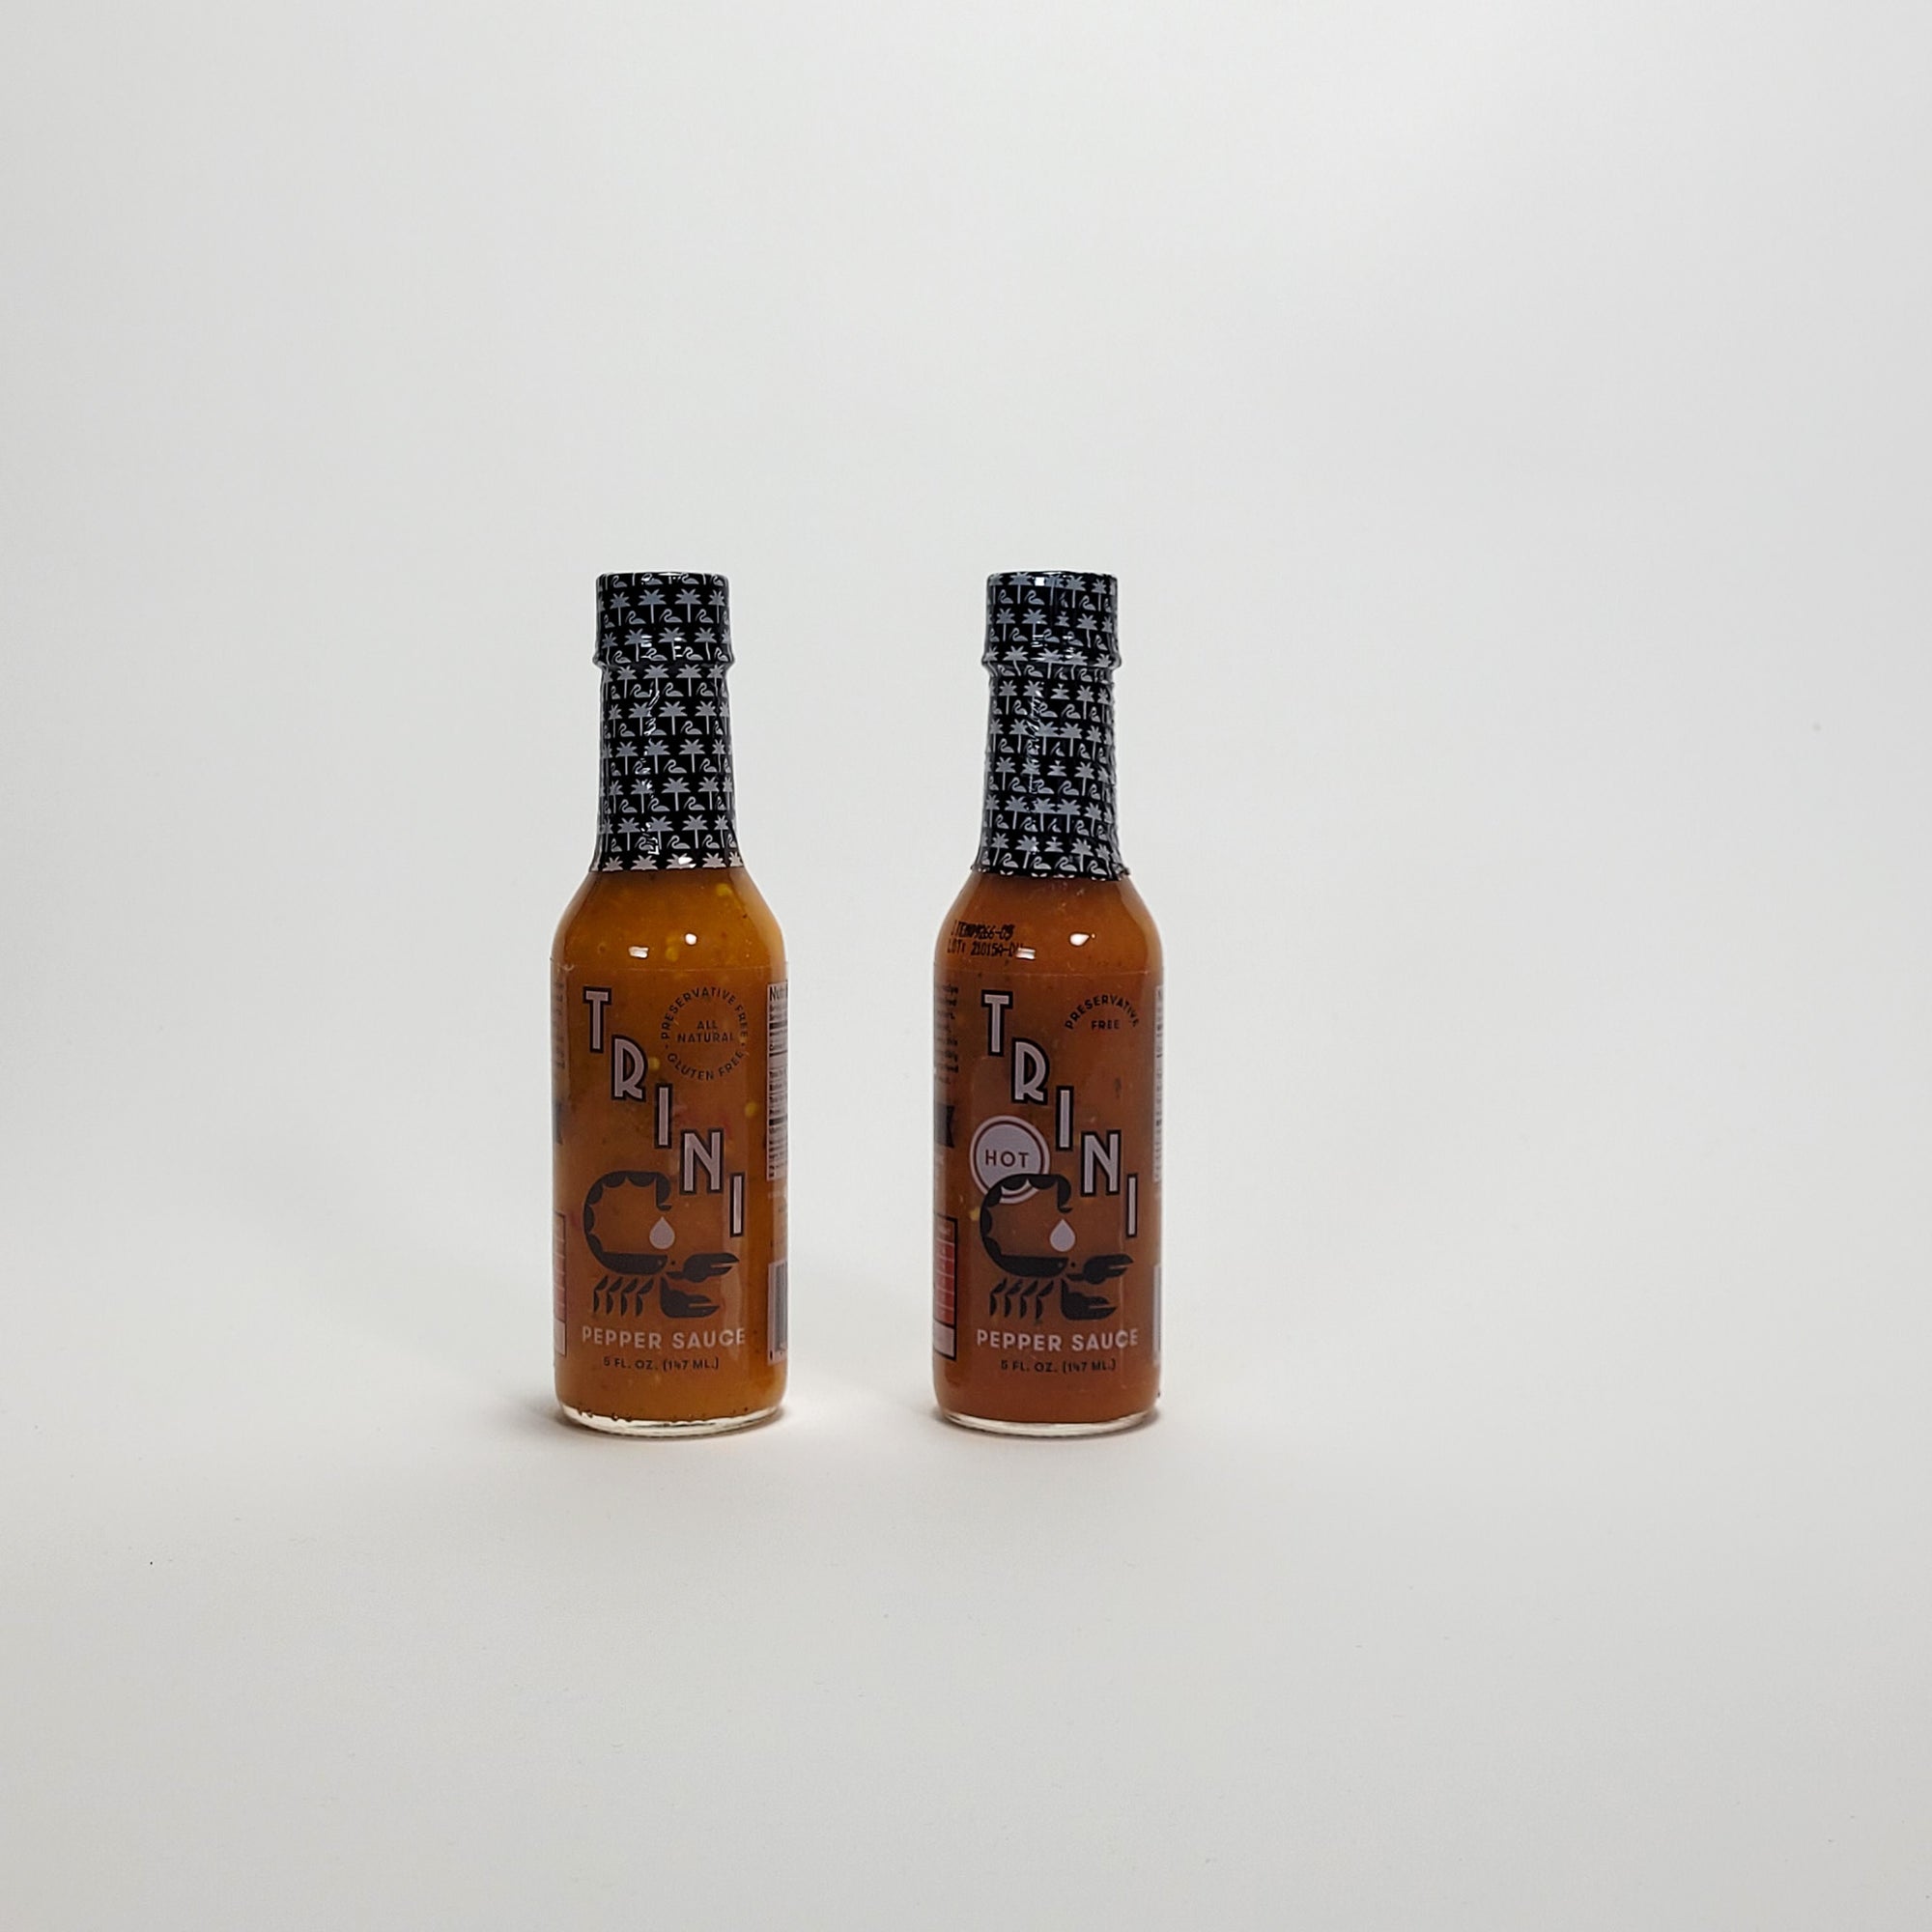 Trini pepper sauce hot sauce collection